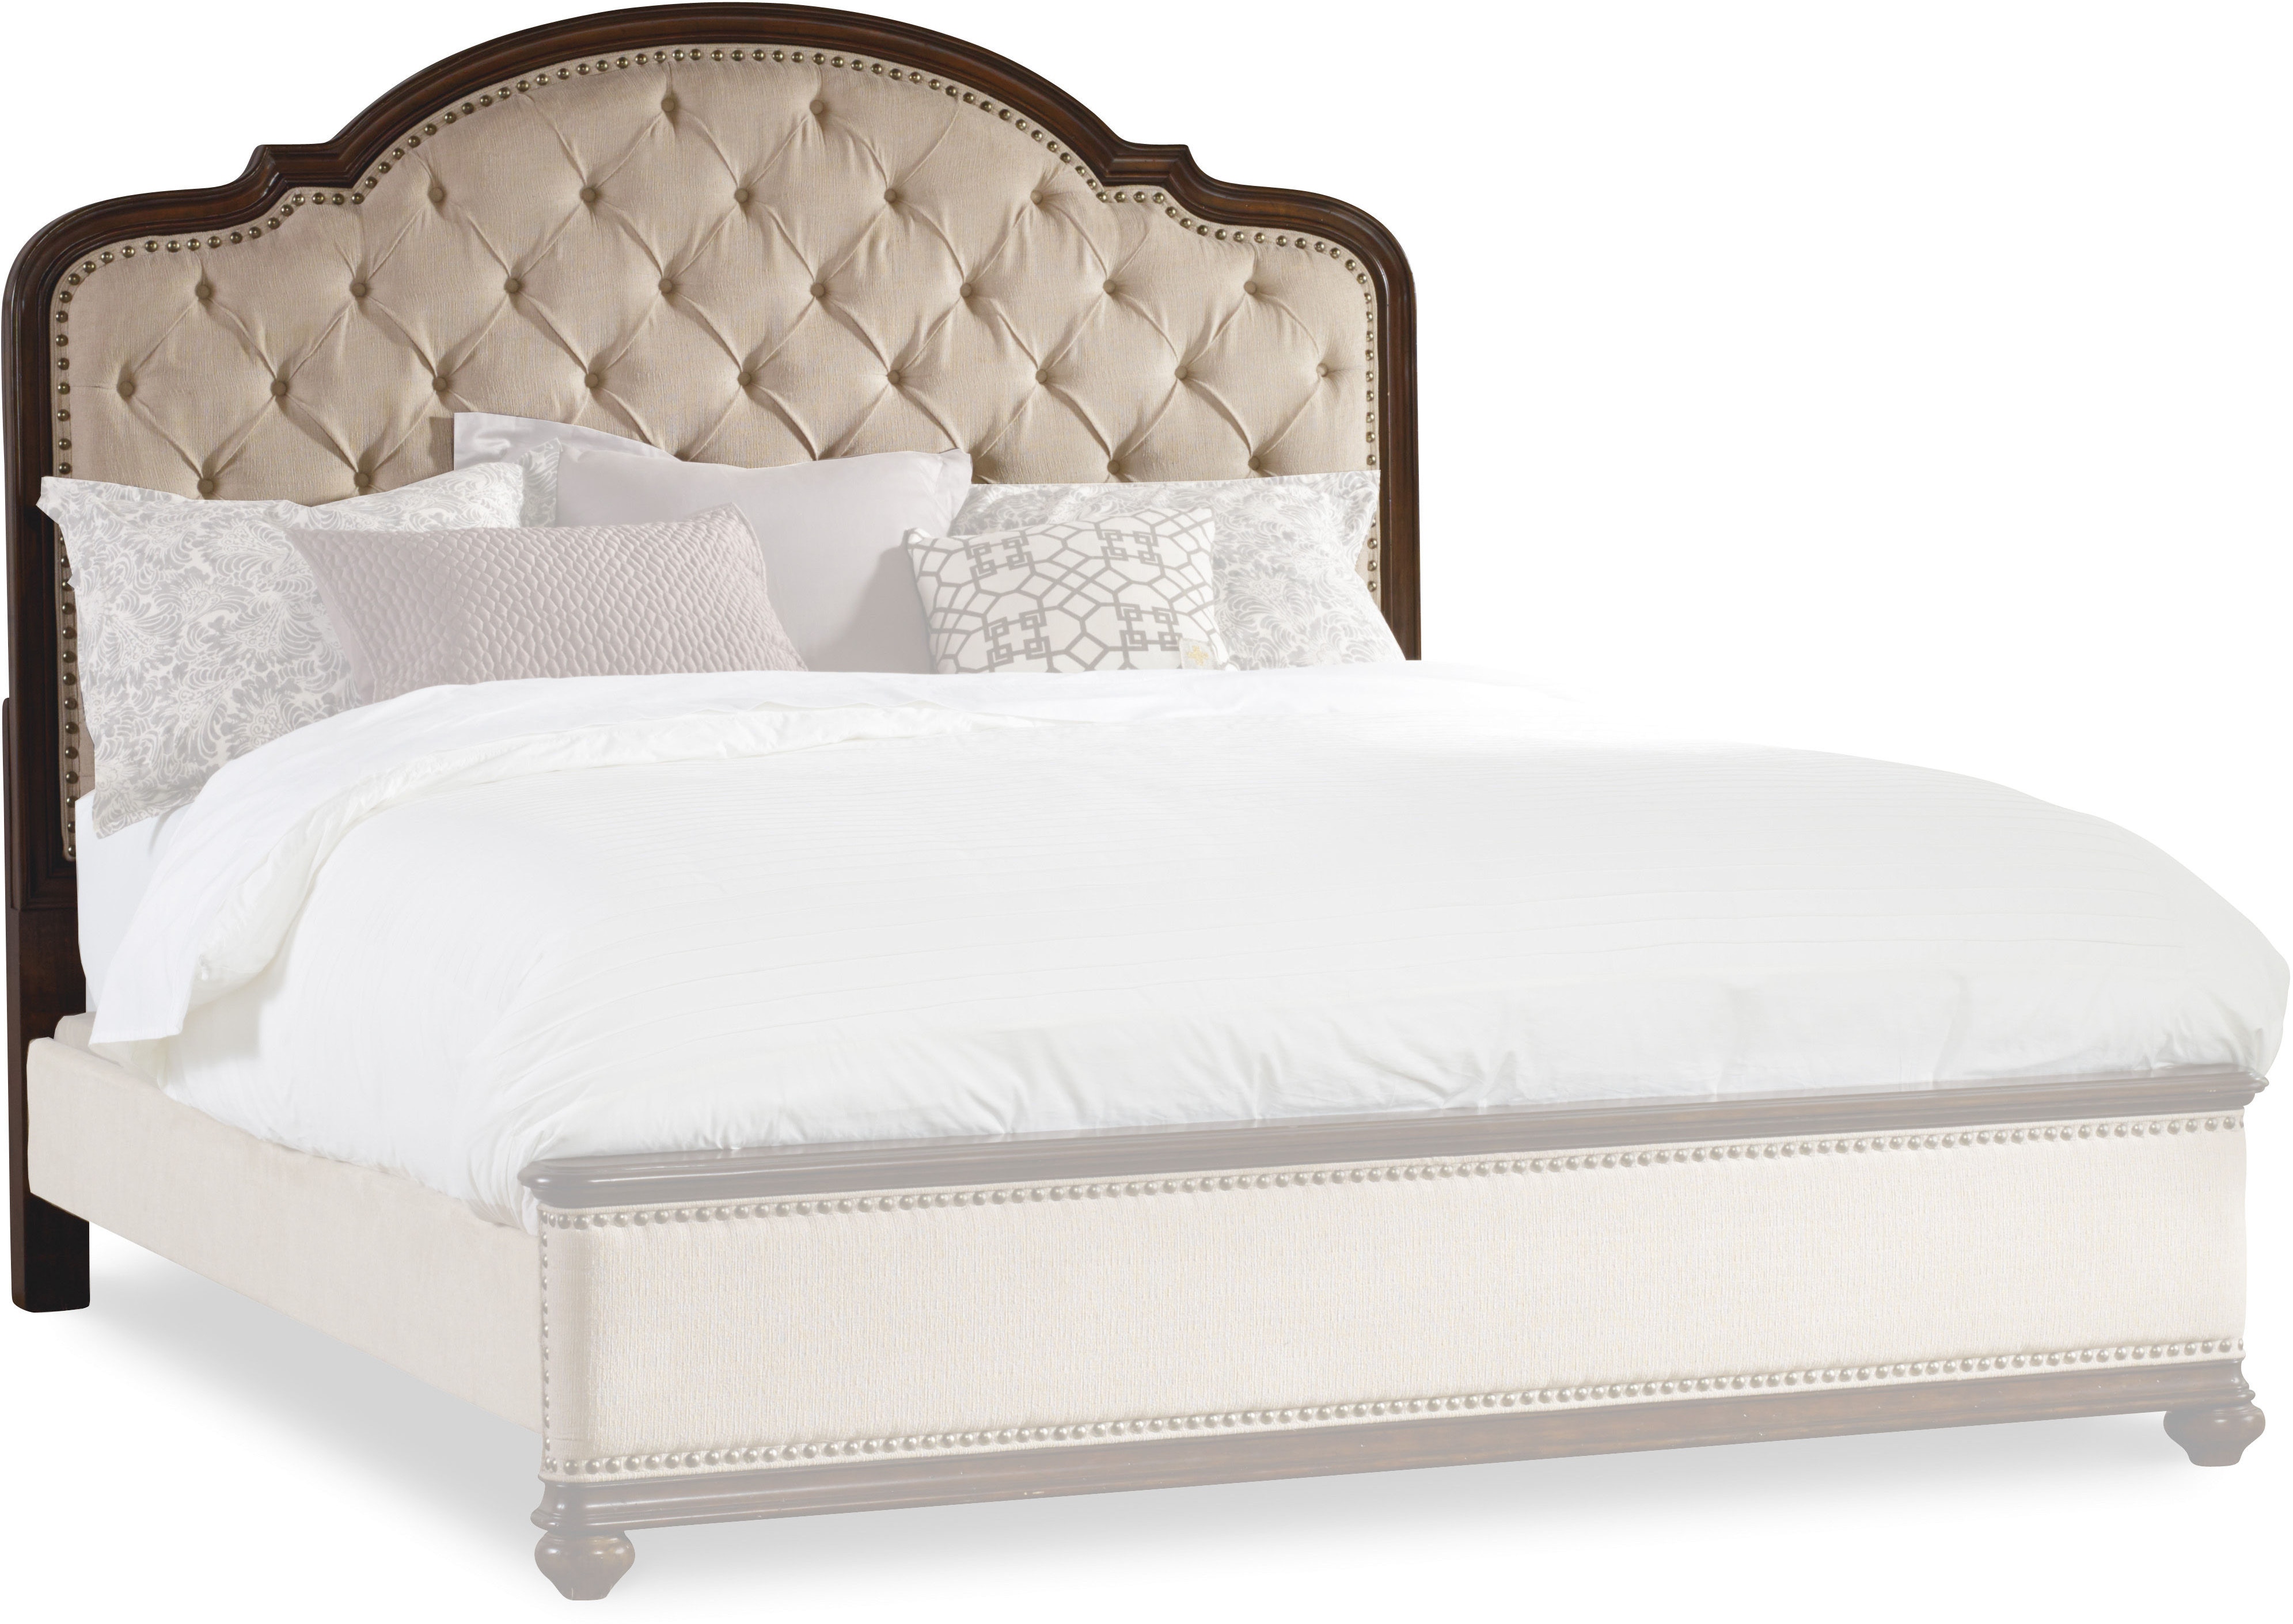 What Is an Upholstered Bed?